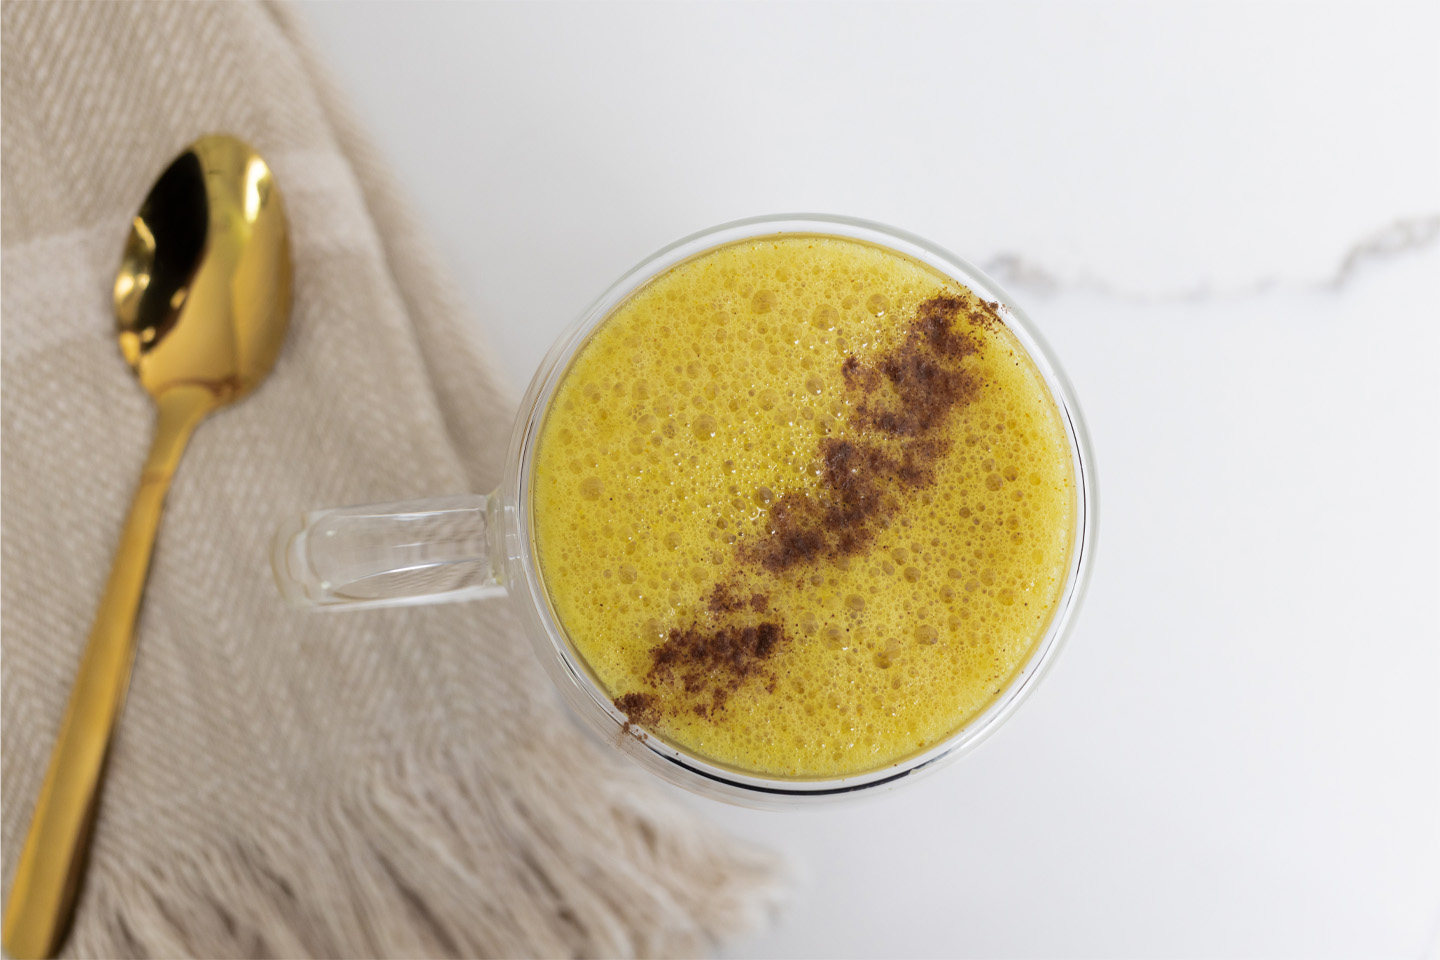 This homemade turmeric latte has been my go-to lately when I want a healthy treat in the afternoon or in the evening after dinner. It's full of good-for-you ingredients, but just feels so fancy and indulgent at the same time!